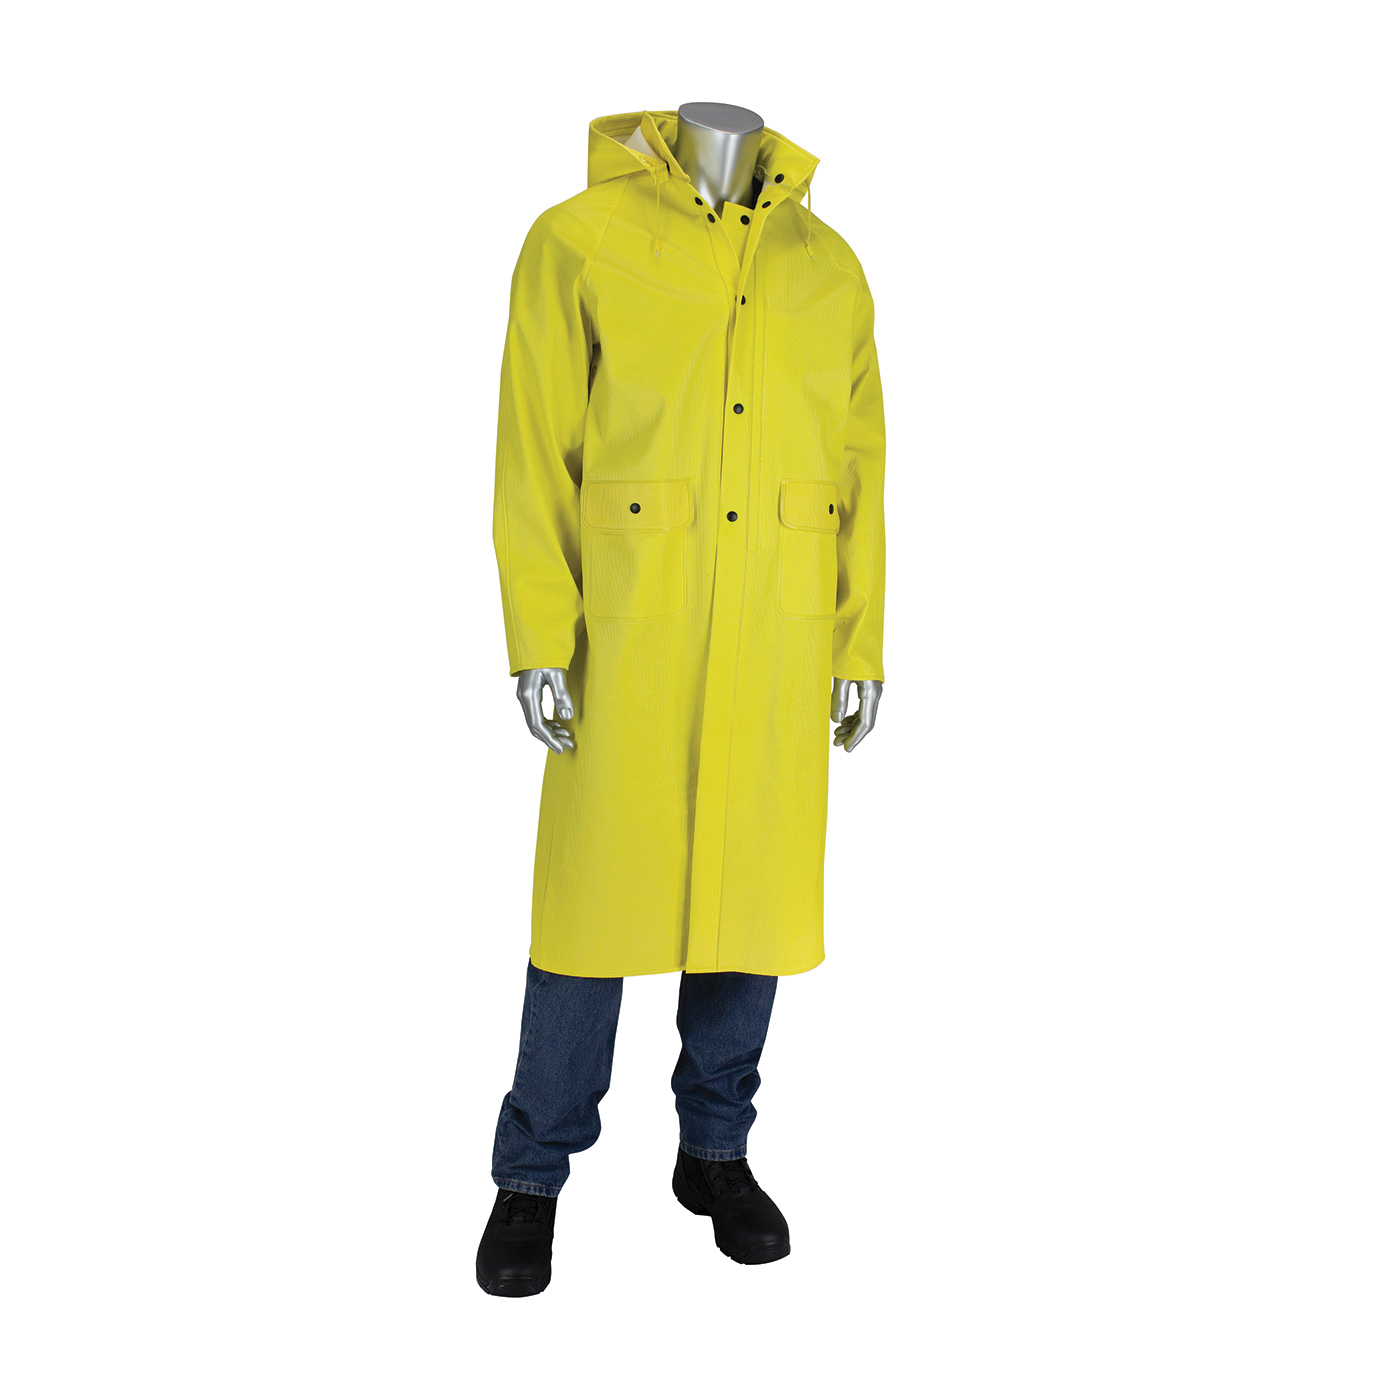 PIP® FALCON™ Flex™ 201-650C/5X 2-Piece Ribbed Rain Jacket With Hood, 5XL, Yellow, PVC/Non-Woven Polyester, Resists: Rips, Tear and Water